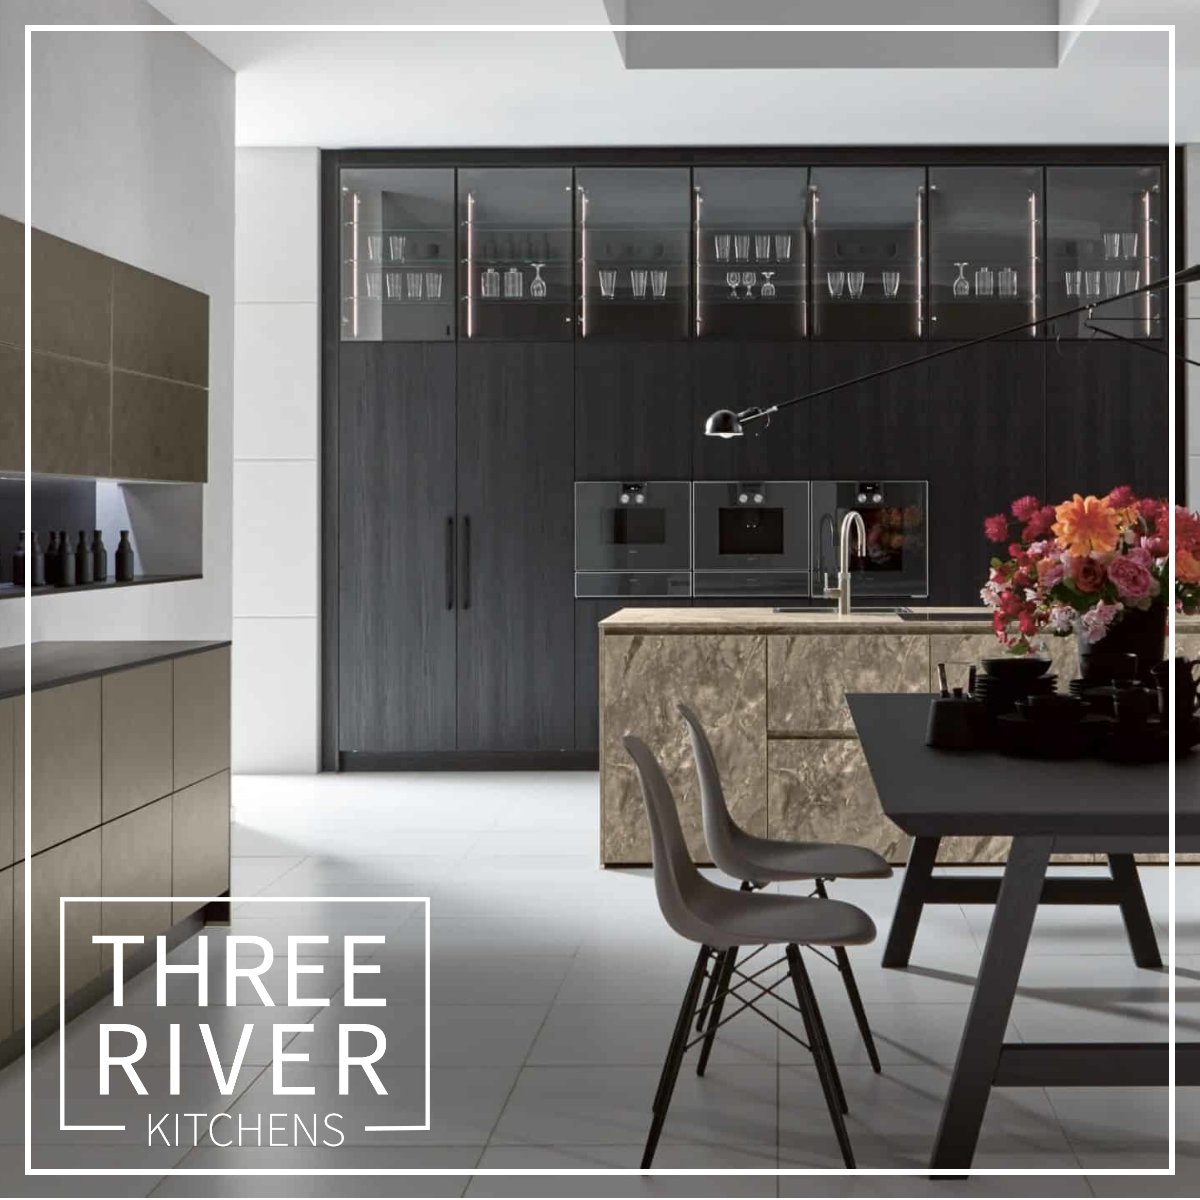 Three River Kitchens: Where modern design meets your lifestyle. Create a space that's uniquely you. Book a kitchen design consultation!   #kitchendesign #kitchenideas #kitchendesignideas #kitchendesigner #kitchendesigntrends #essexbusiness #essexkitchens #chelmsfordbusiness